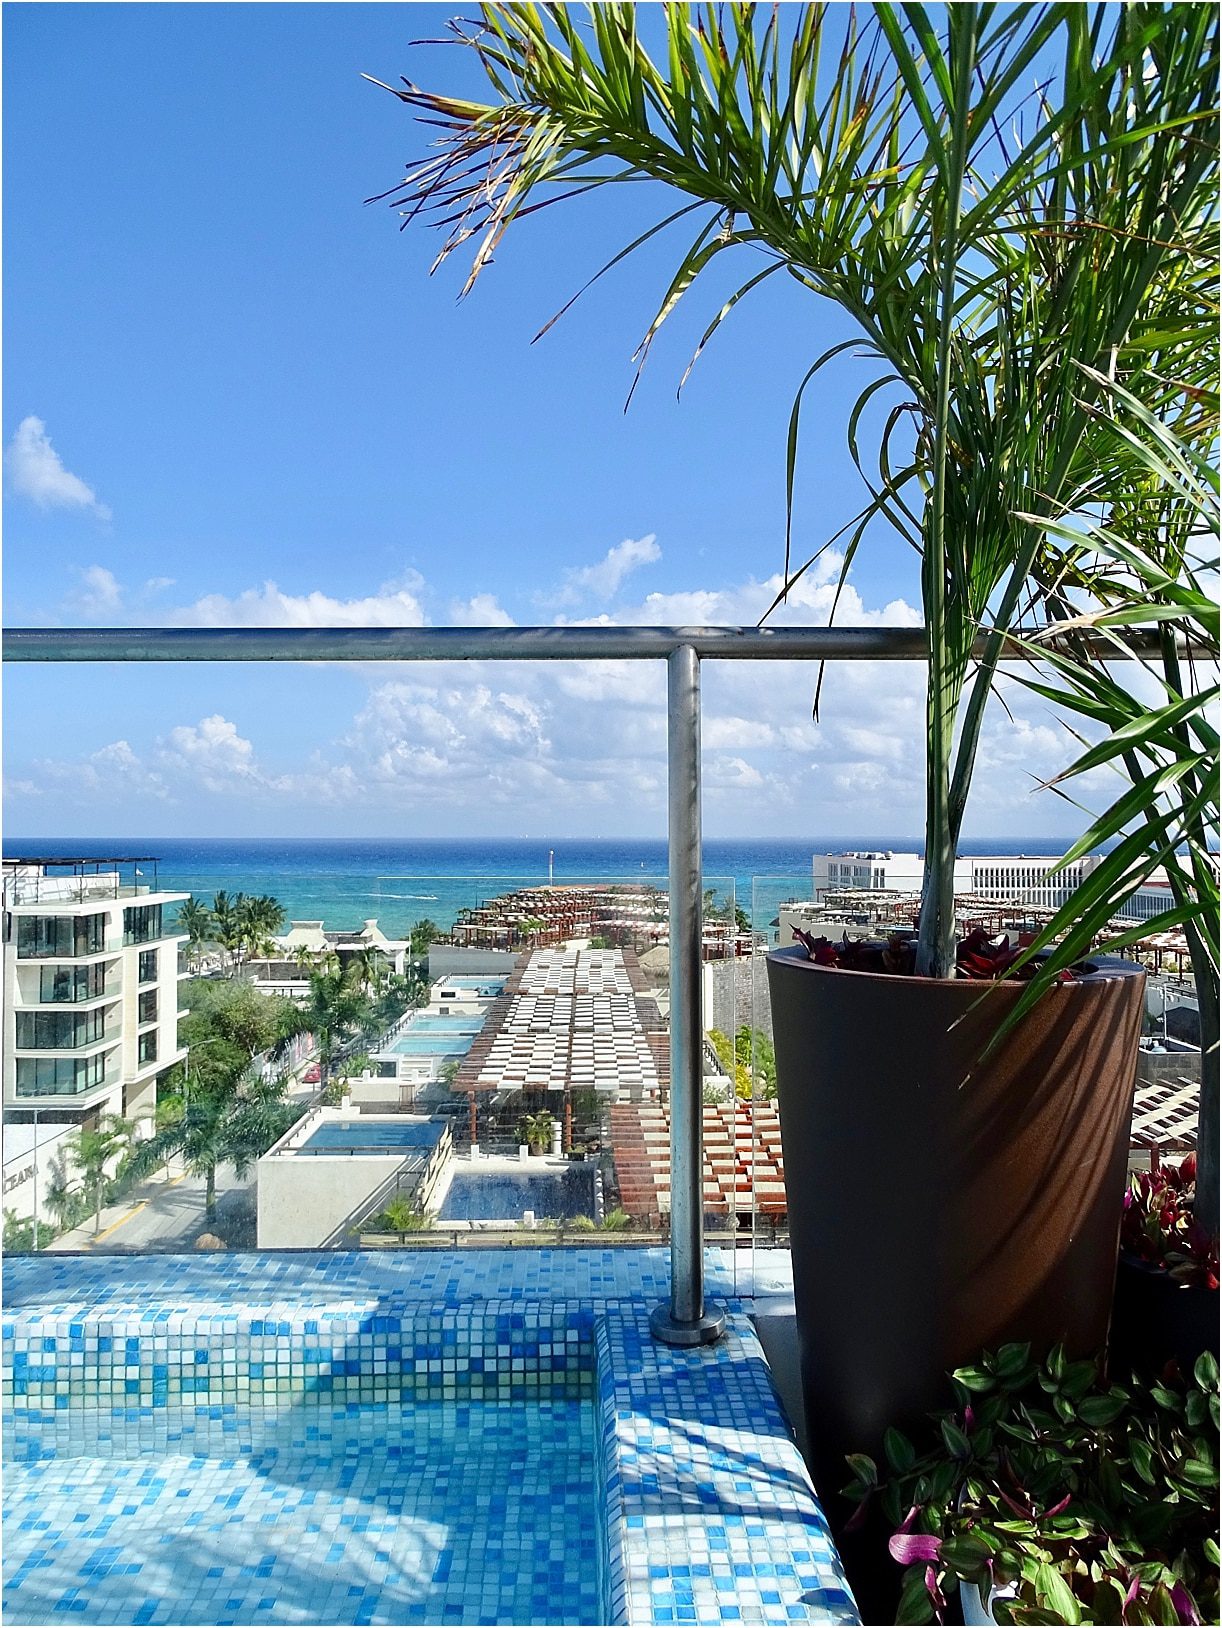 The Reef 28 Playacar Cancun Mexico All Inclusive Resort Adults Only | Hill City Bride Virginia Weddings Destination Wedding Blog Rooftop Pool Bar